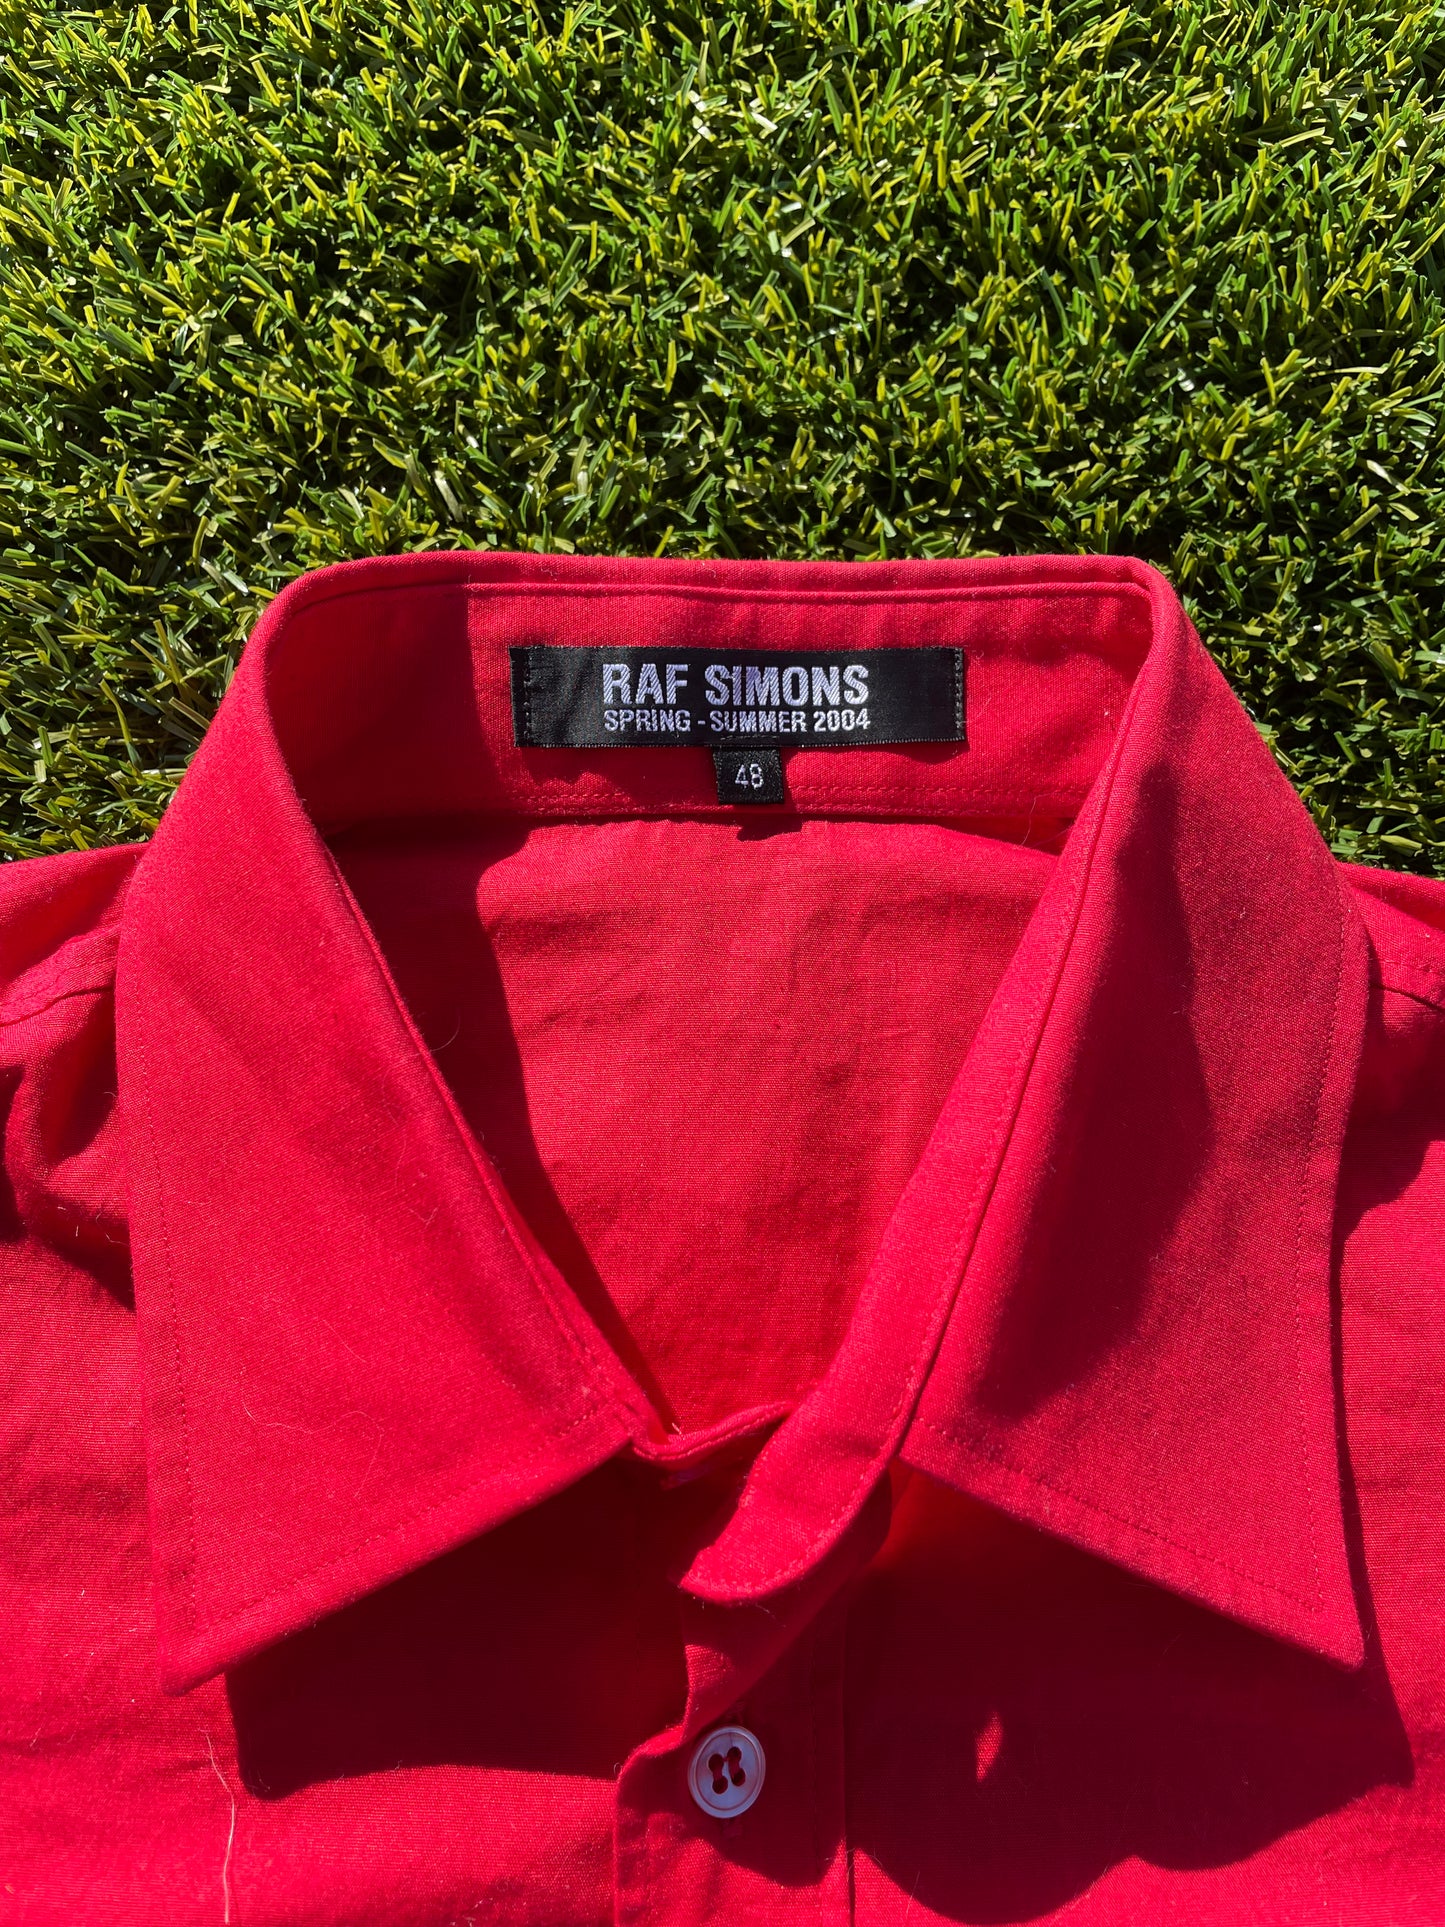 SS04 “May The Circles Be Unbroken” - RAF Simons Detachable Button Up